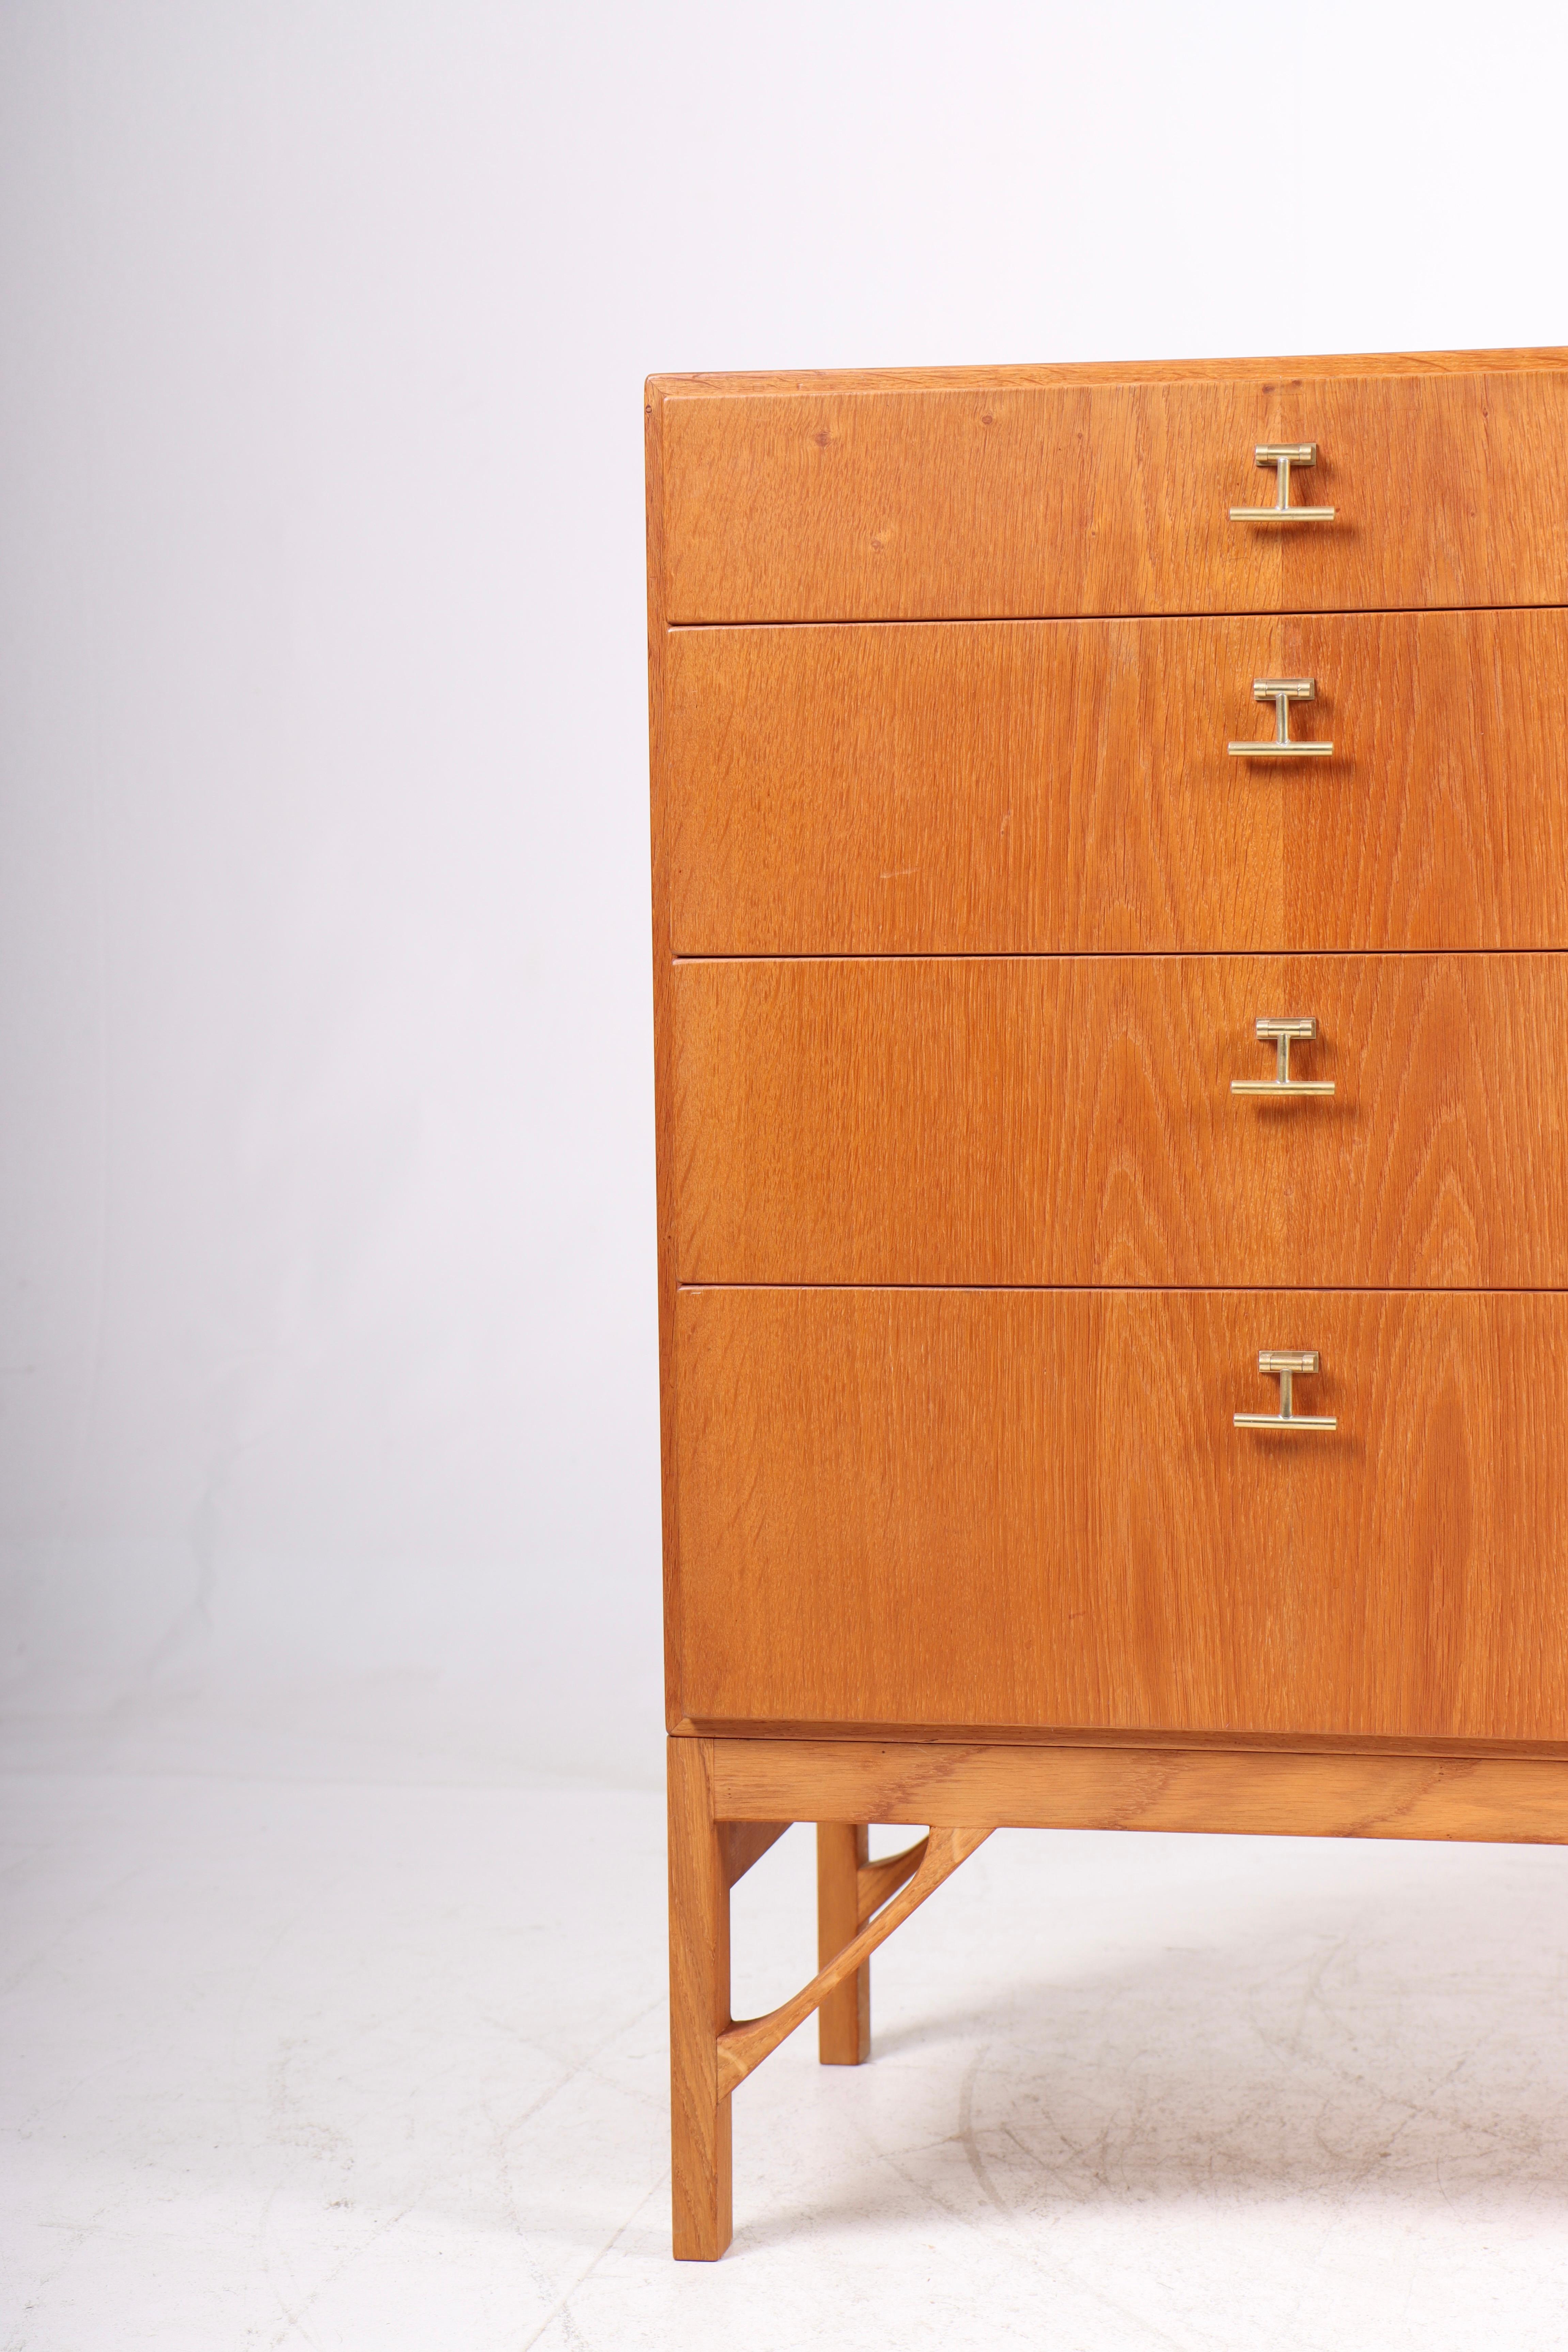 Commode in Scandinavian oak with hardware in brass. Designed by MAA. Børge Mogensen in the 1950s, this piece is made by CM Madsen cabinetmakers, Denmark in the 1960s. Great condition.